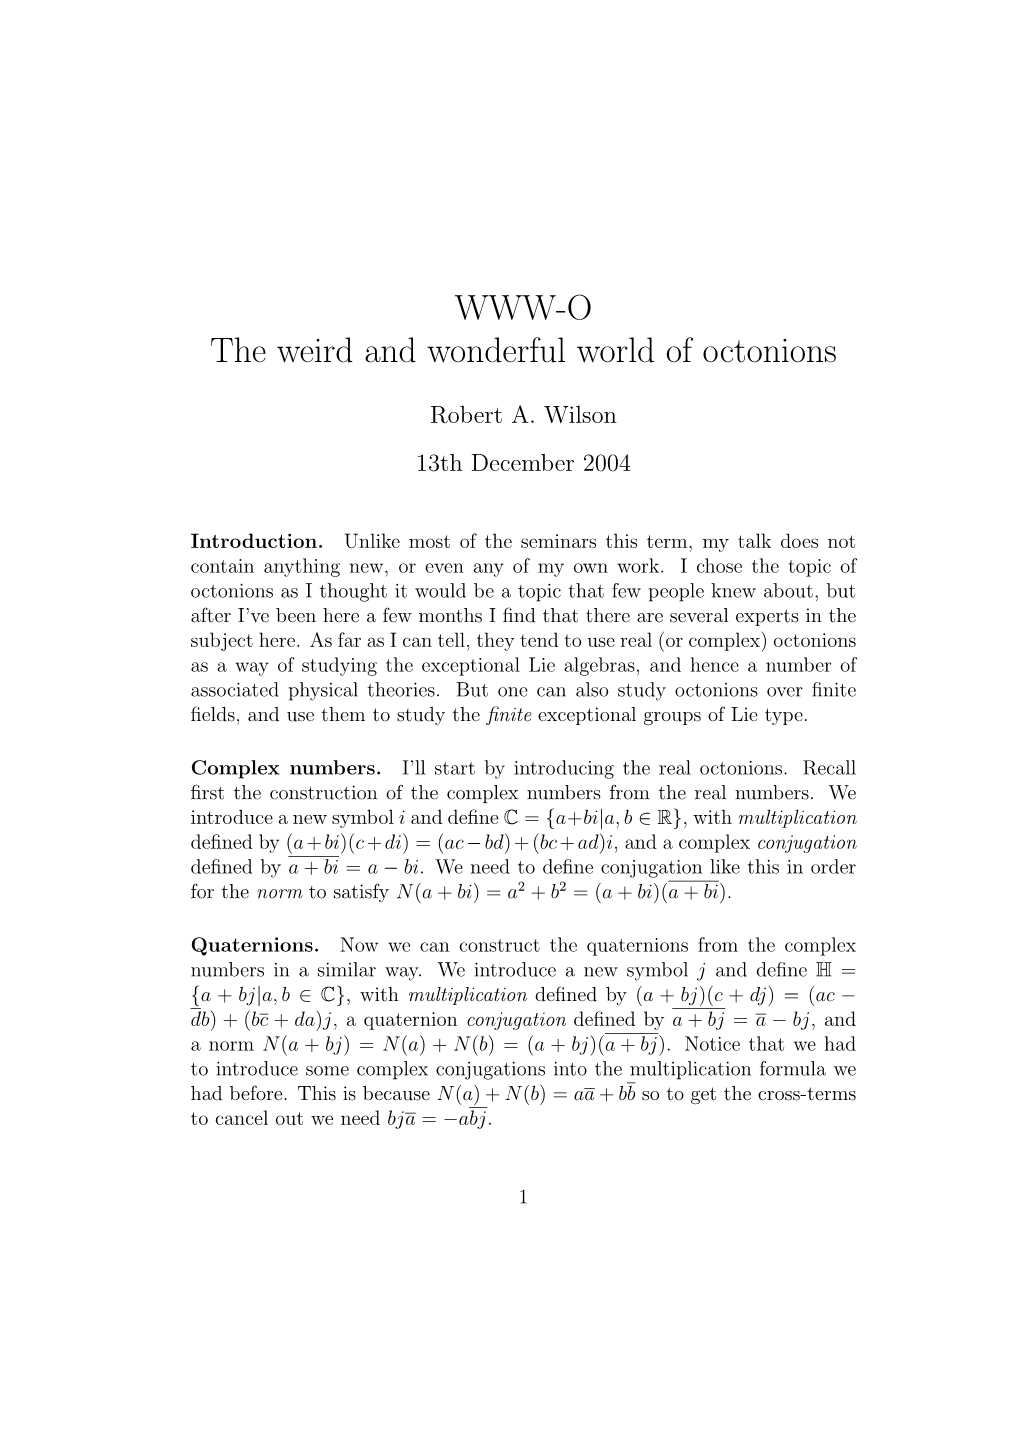 WWW-O the Weird and Wonderful World of Octonions